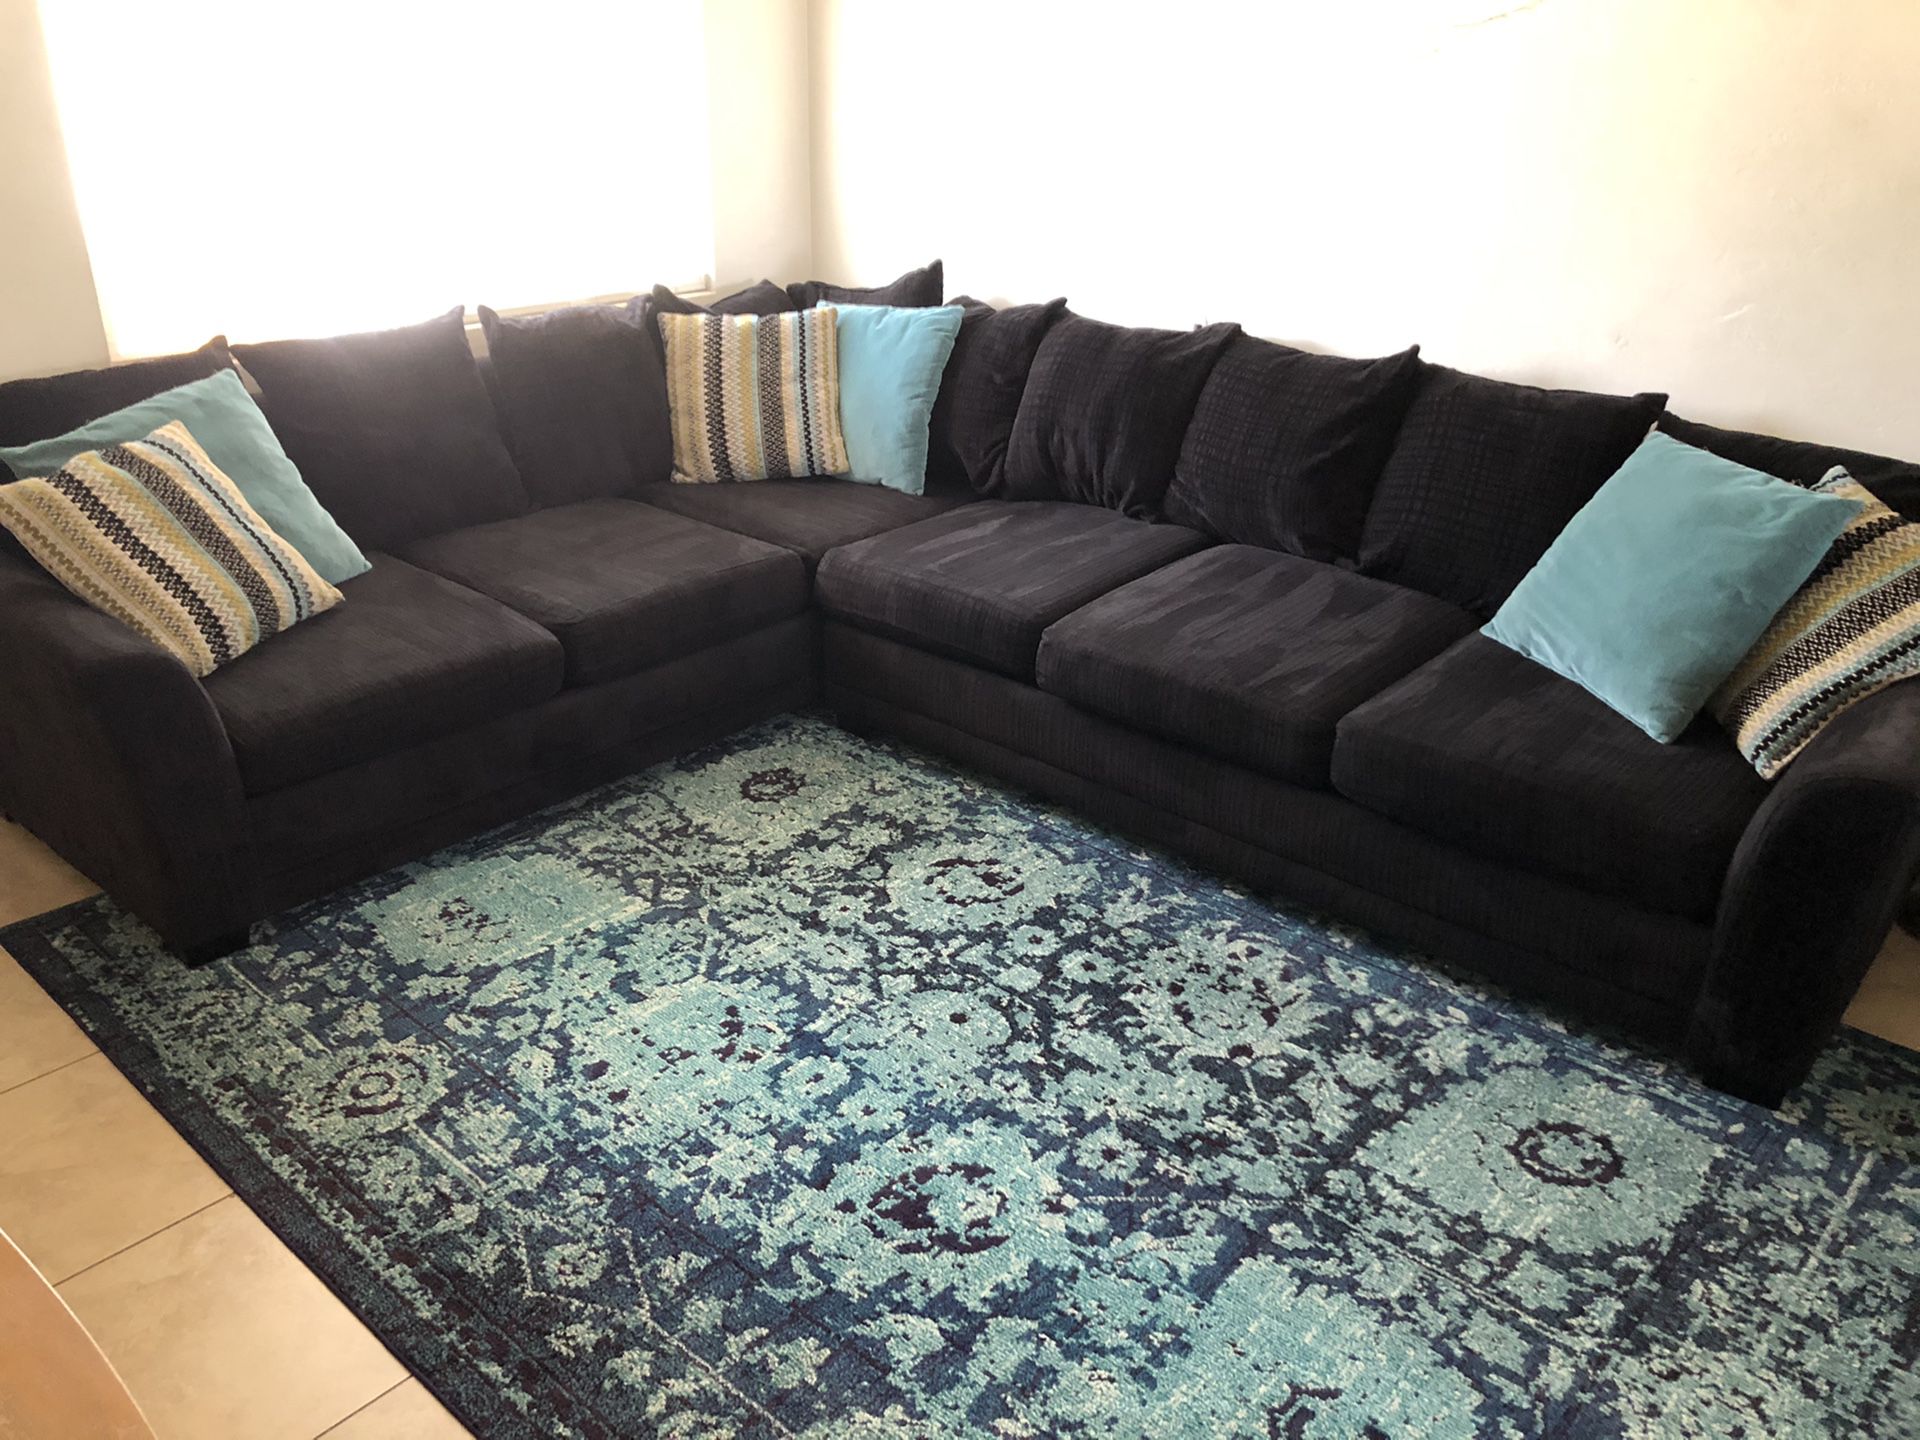 Free Black Sectional Sofa, Must pick up by 6/6/20